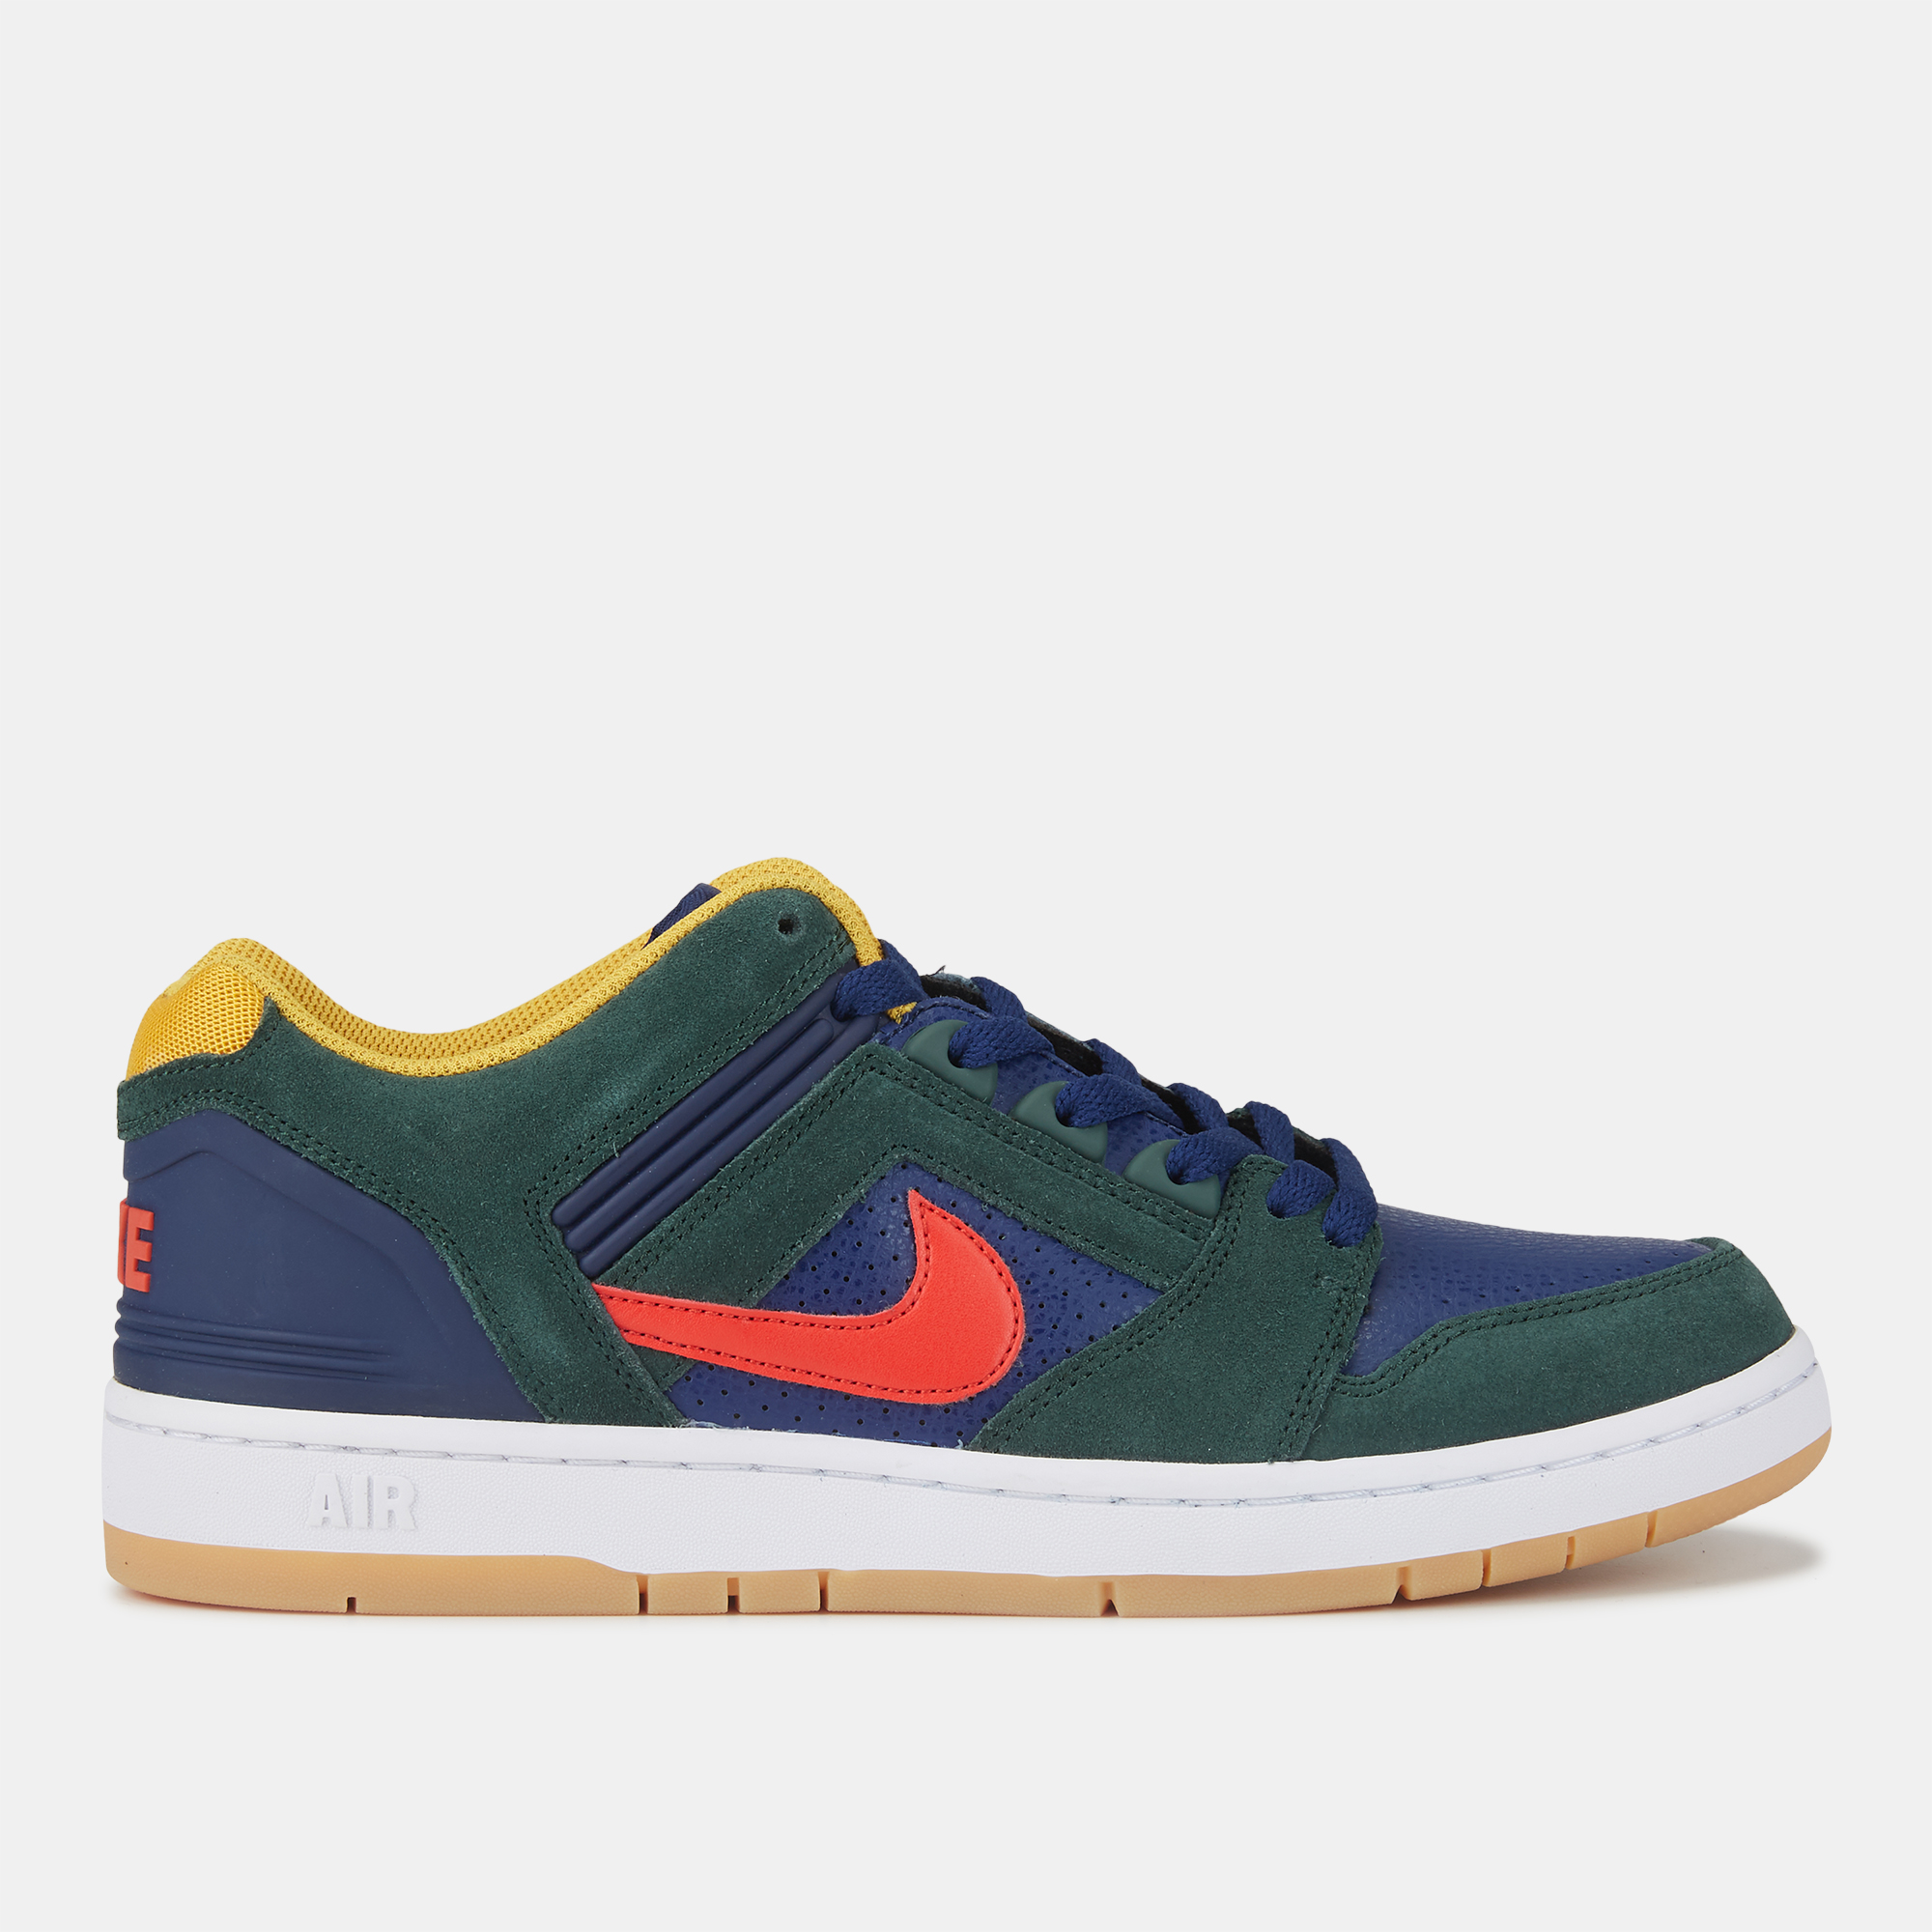 Nike SB Air Force 2 Low Shoe Shoes Nike Brands SSS